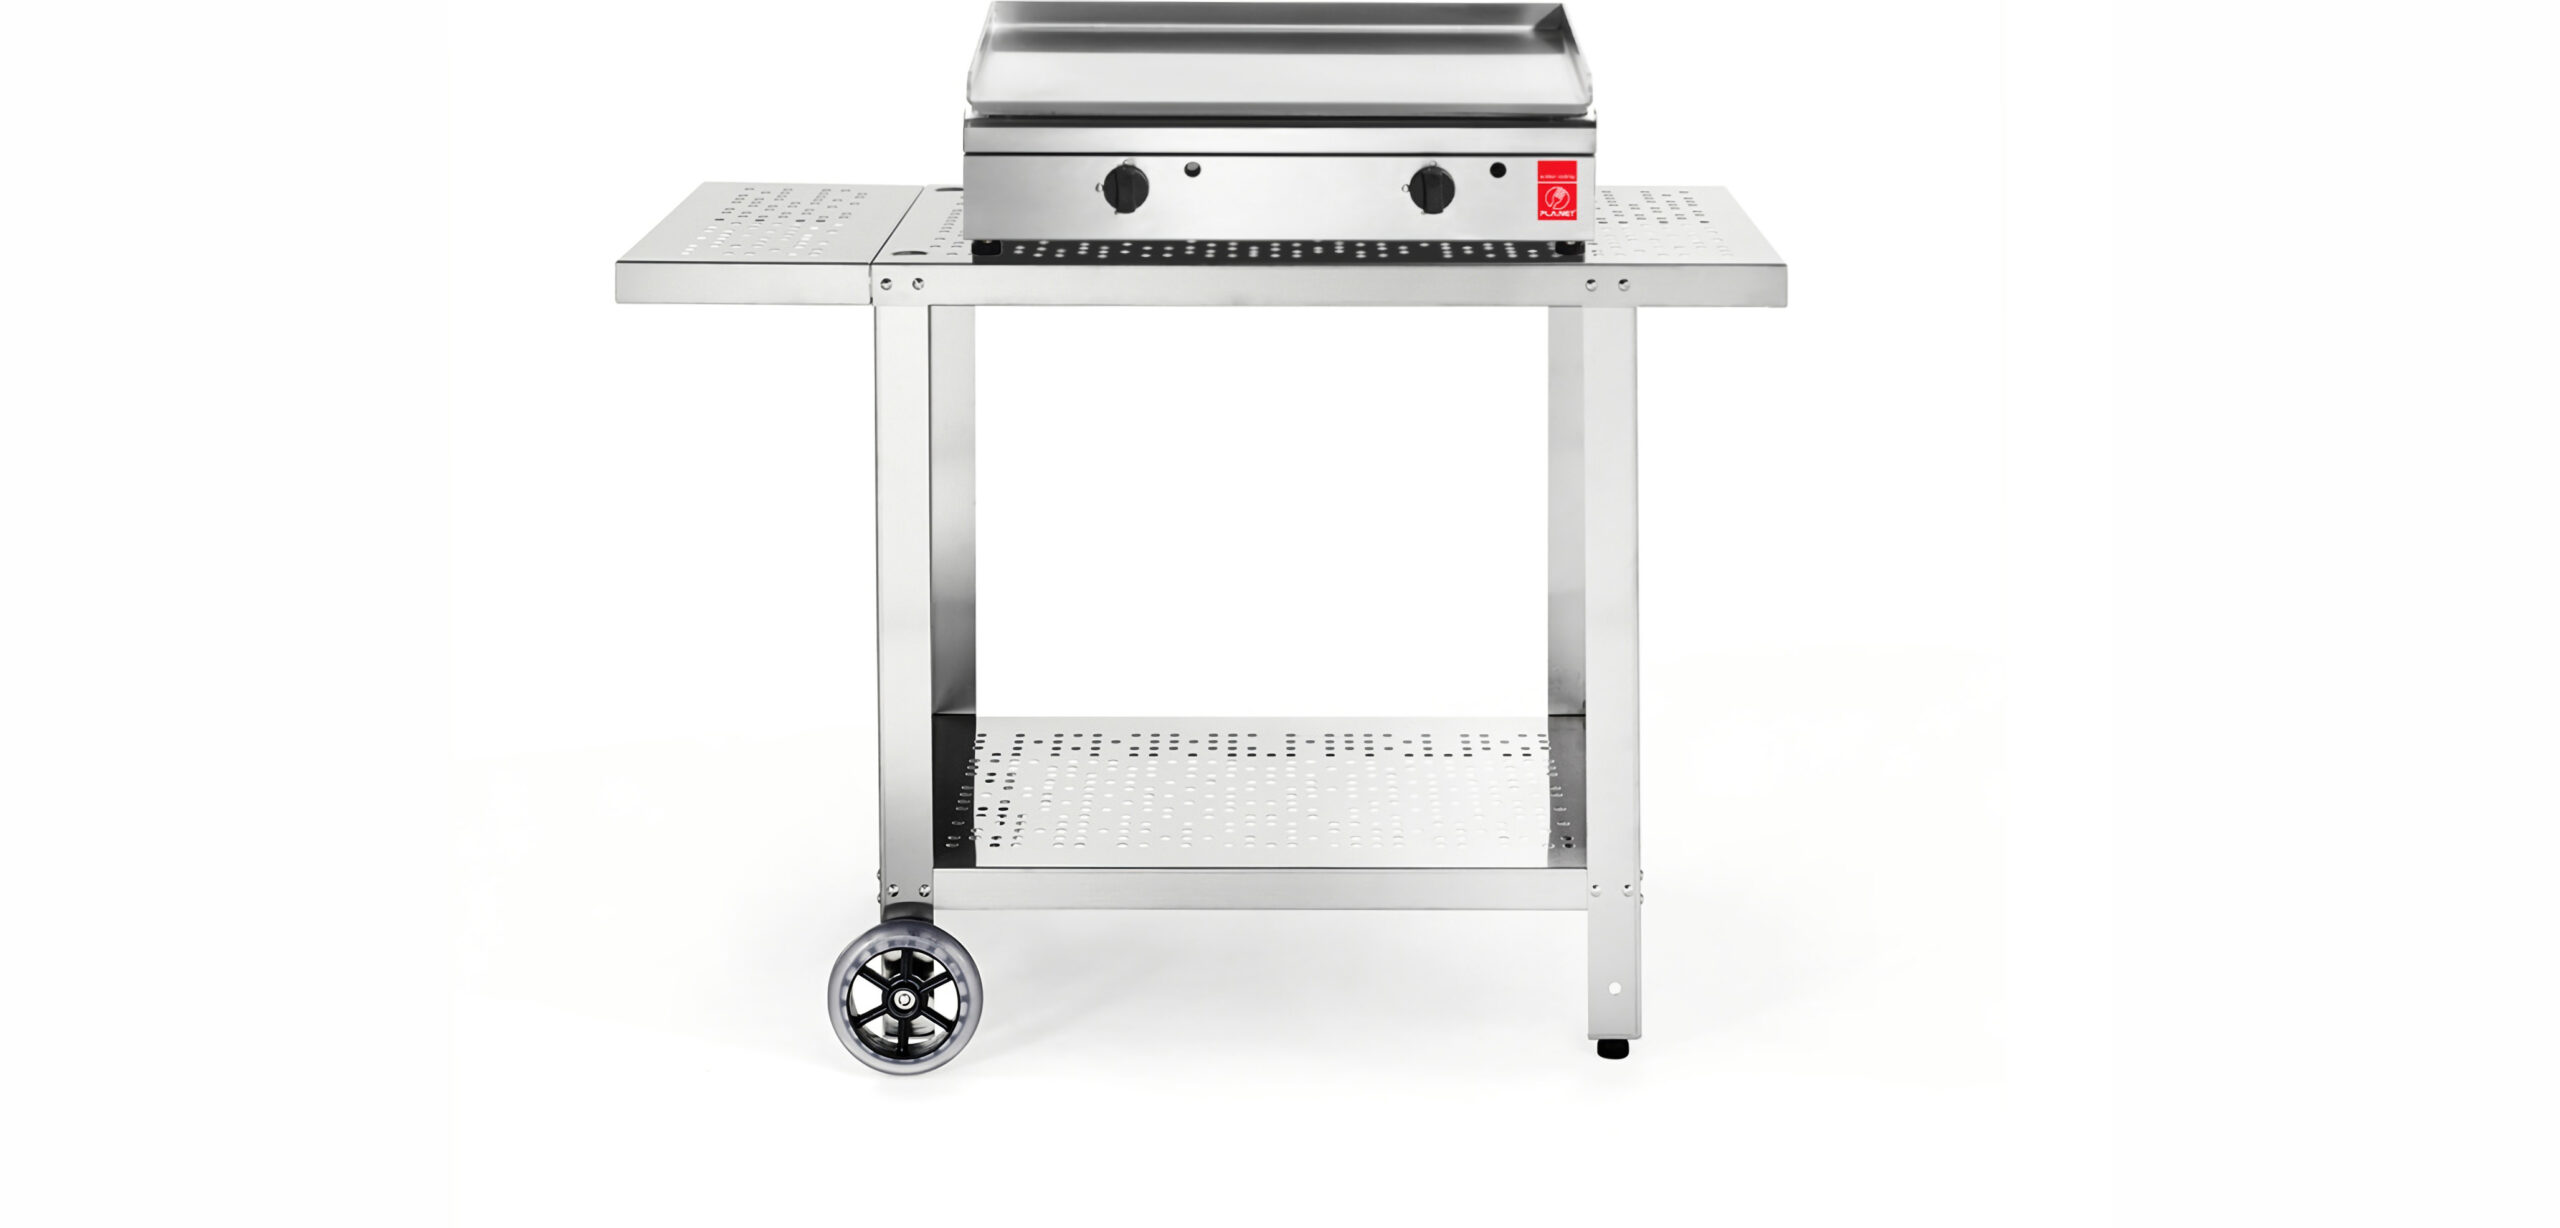 Alfa cooking unit thumb image planet barbecue - PLA.NET Outdoor Cooking